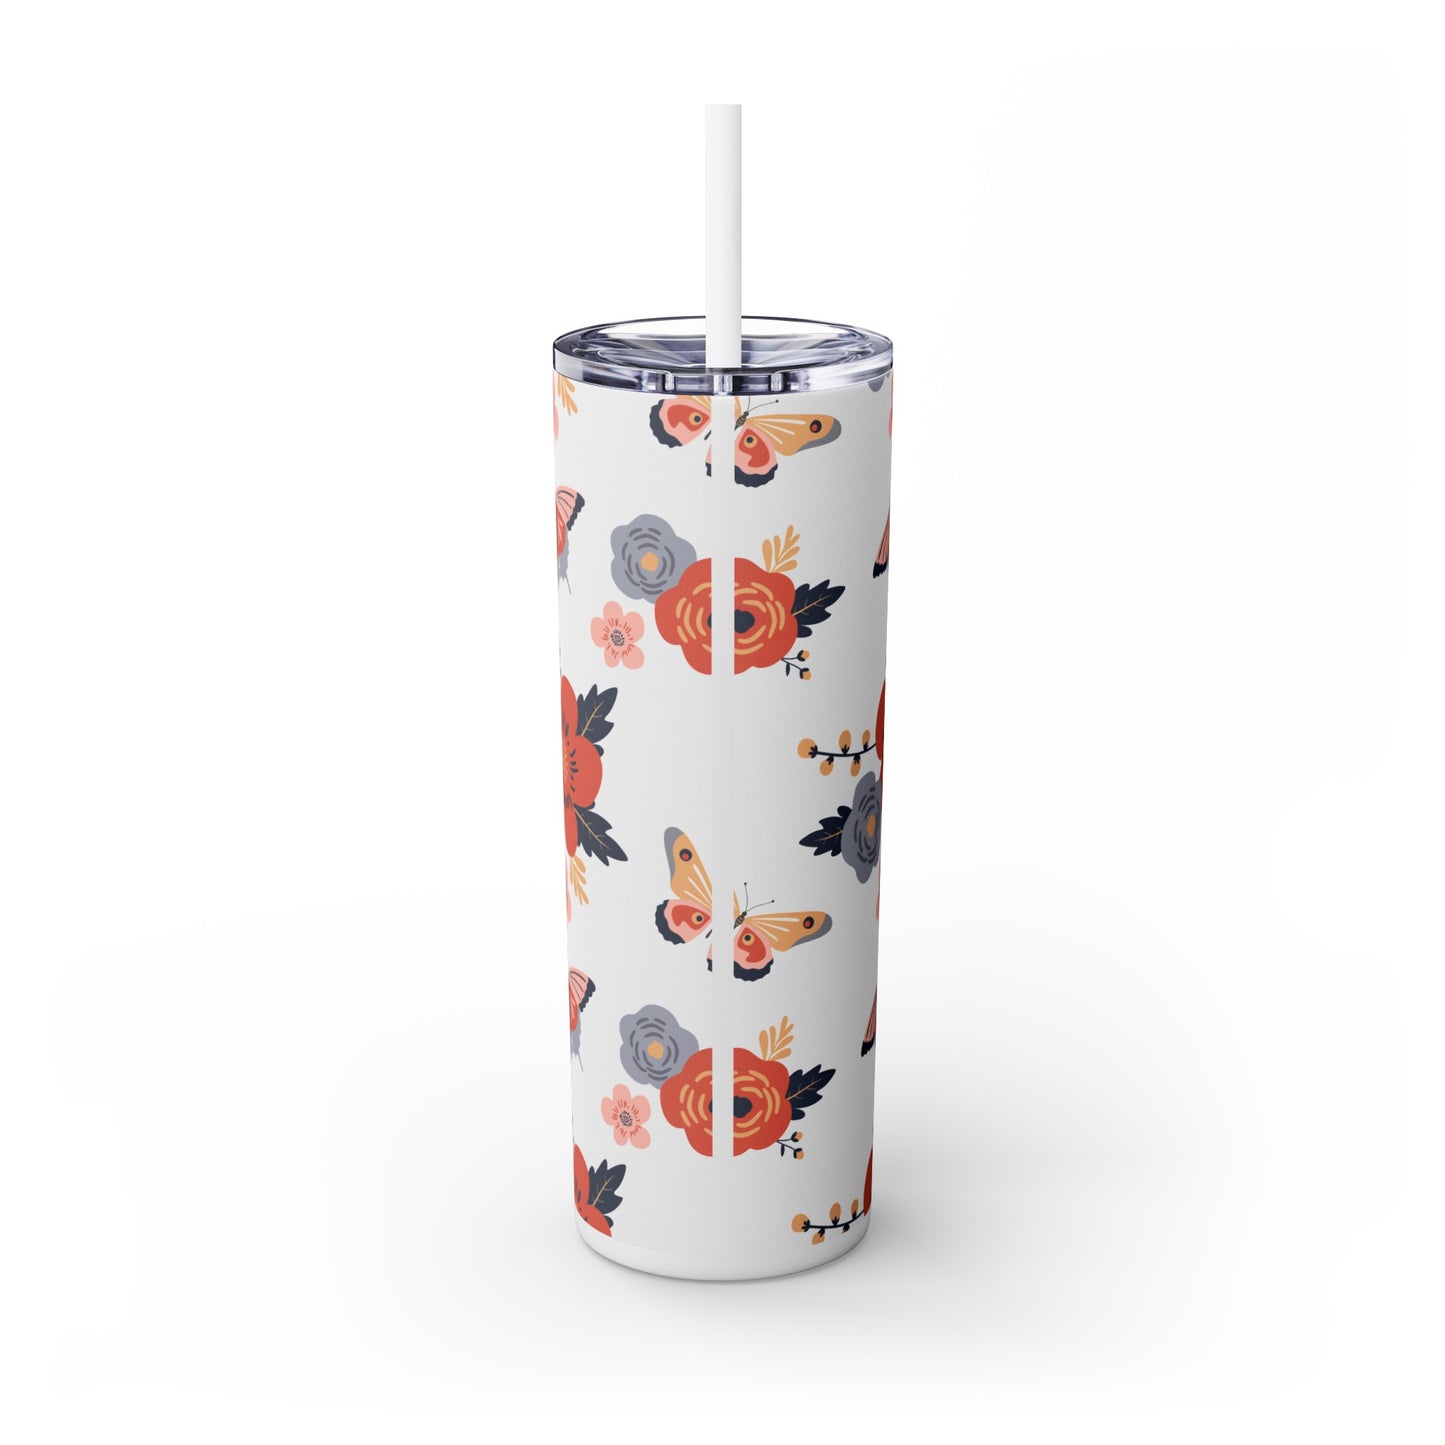 She believed she Couldn't So God Did Skinny Tumbler with Straw, 20oz